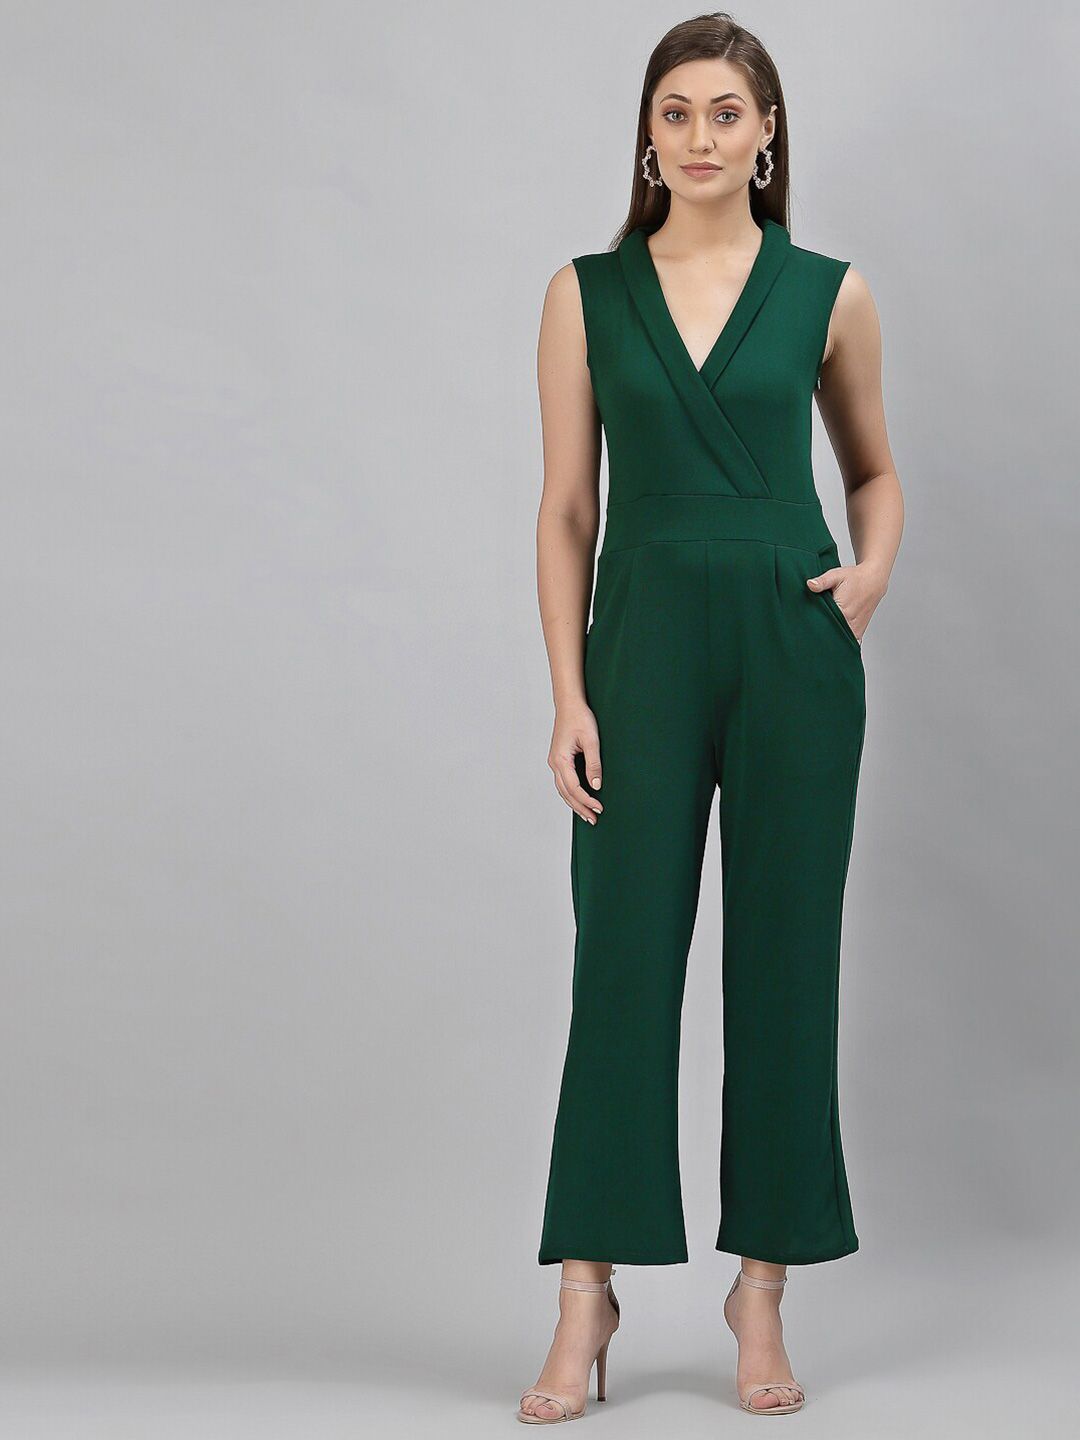 Selvia Green Solid Basic Jumpsuit Price in India